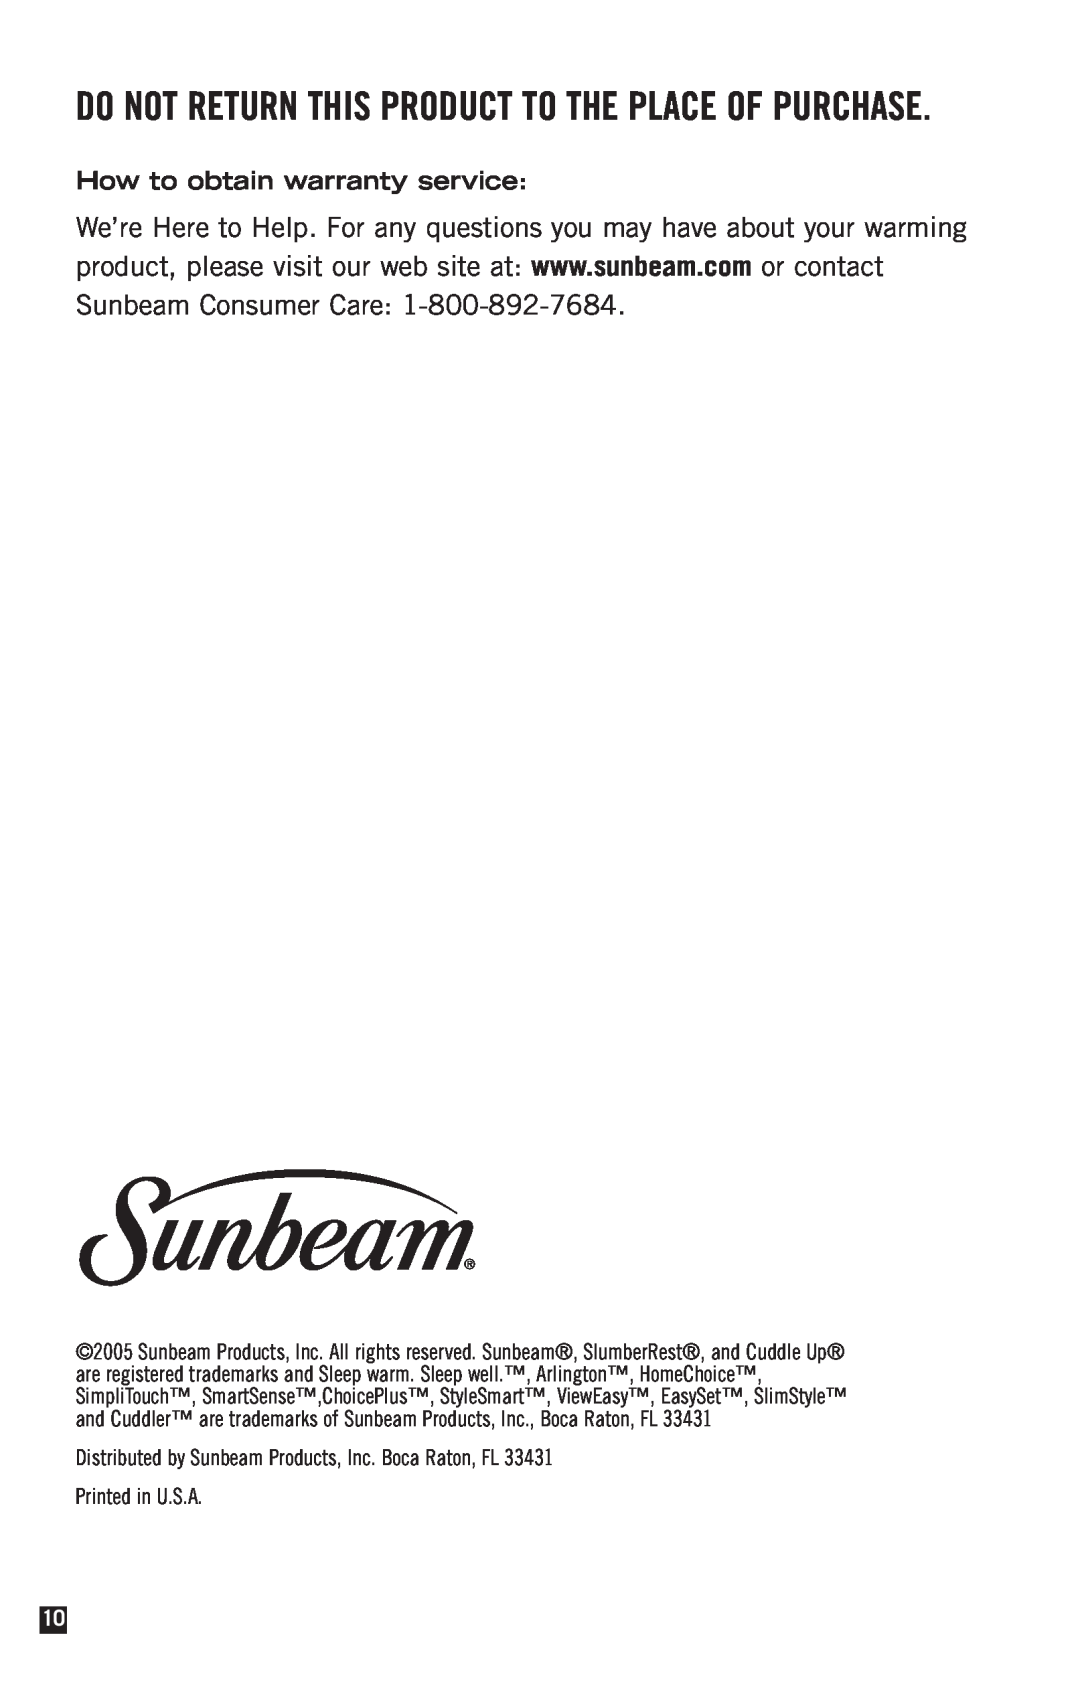 Sunbeam Electric Heater manual How to obtain warranty service 